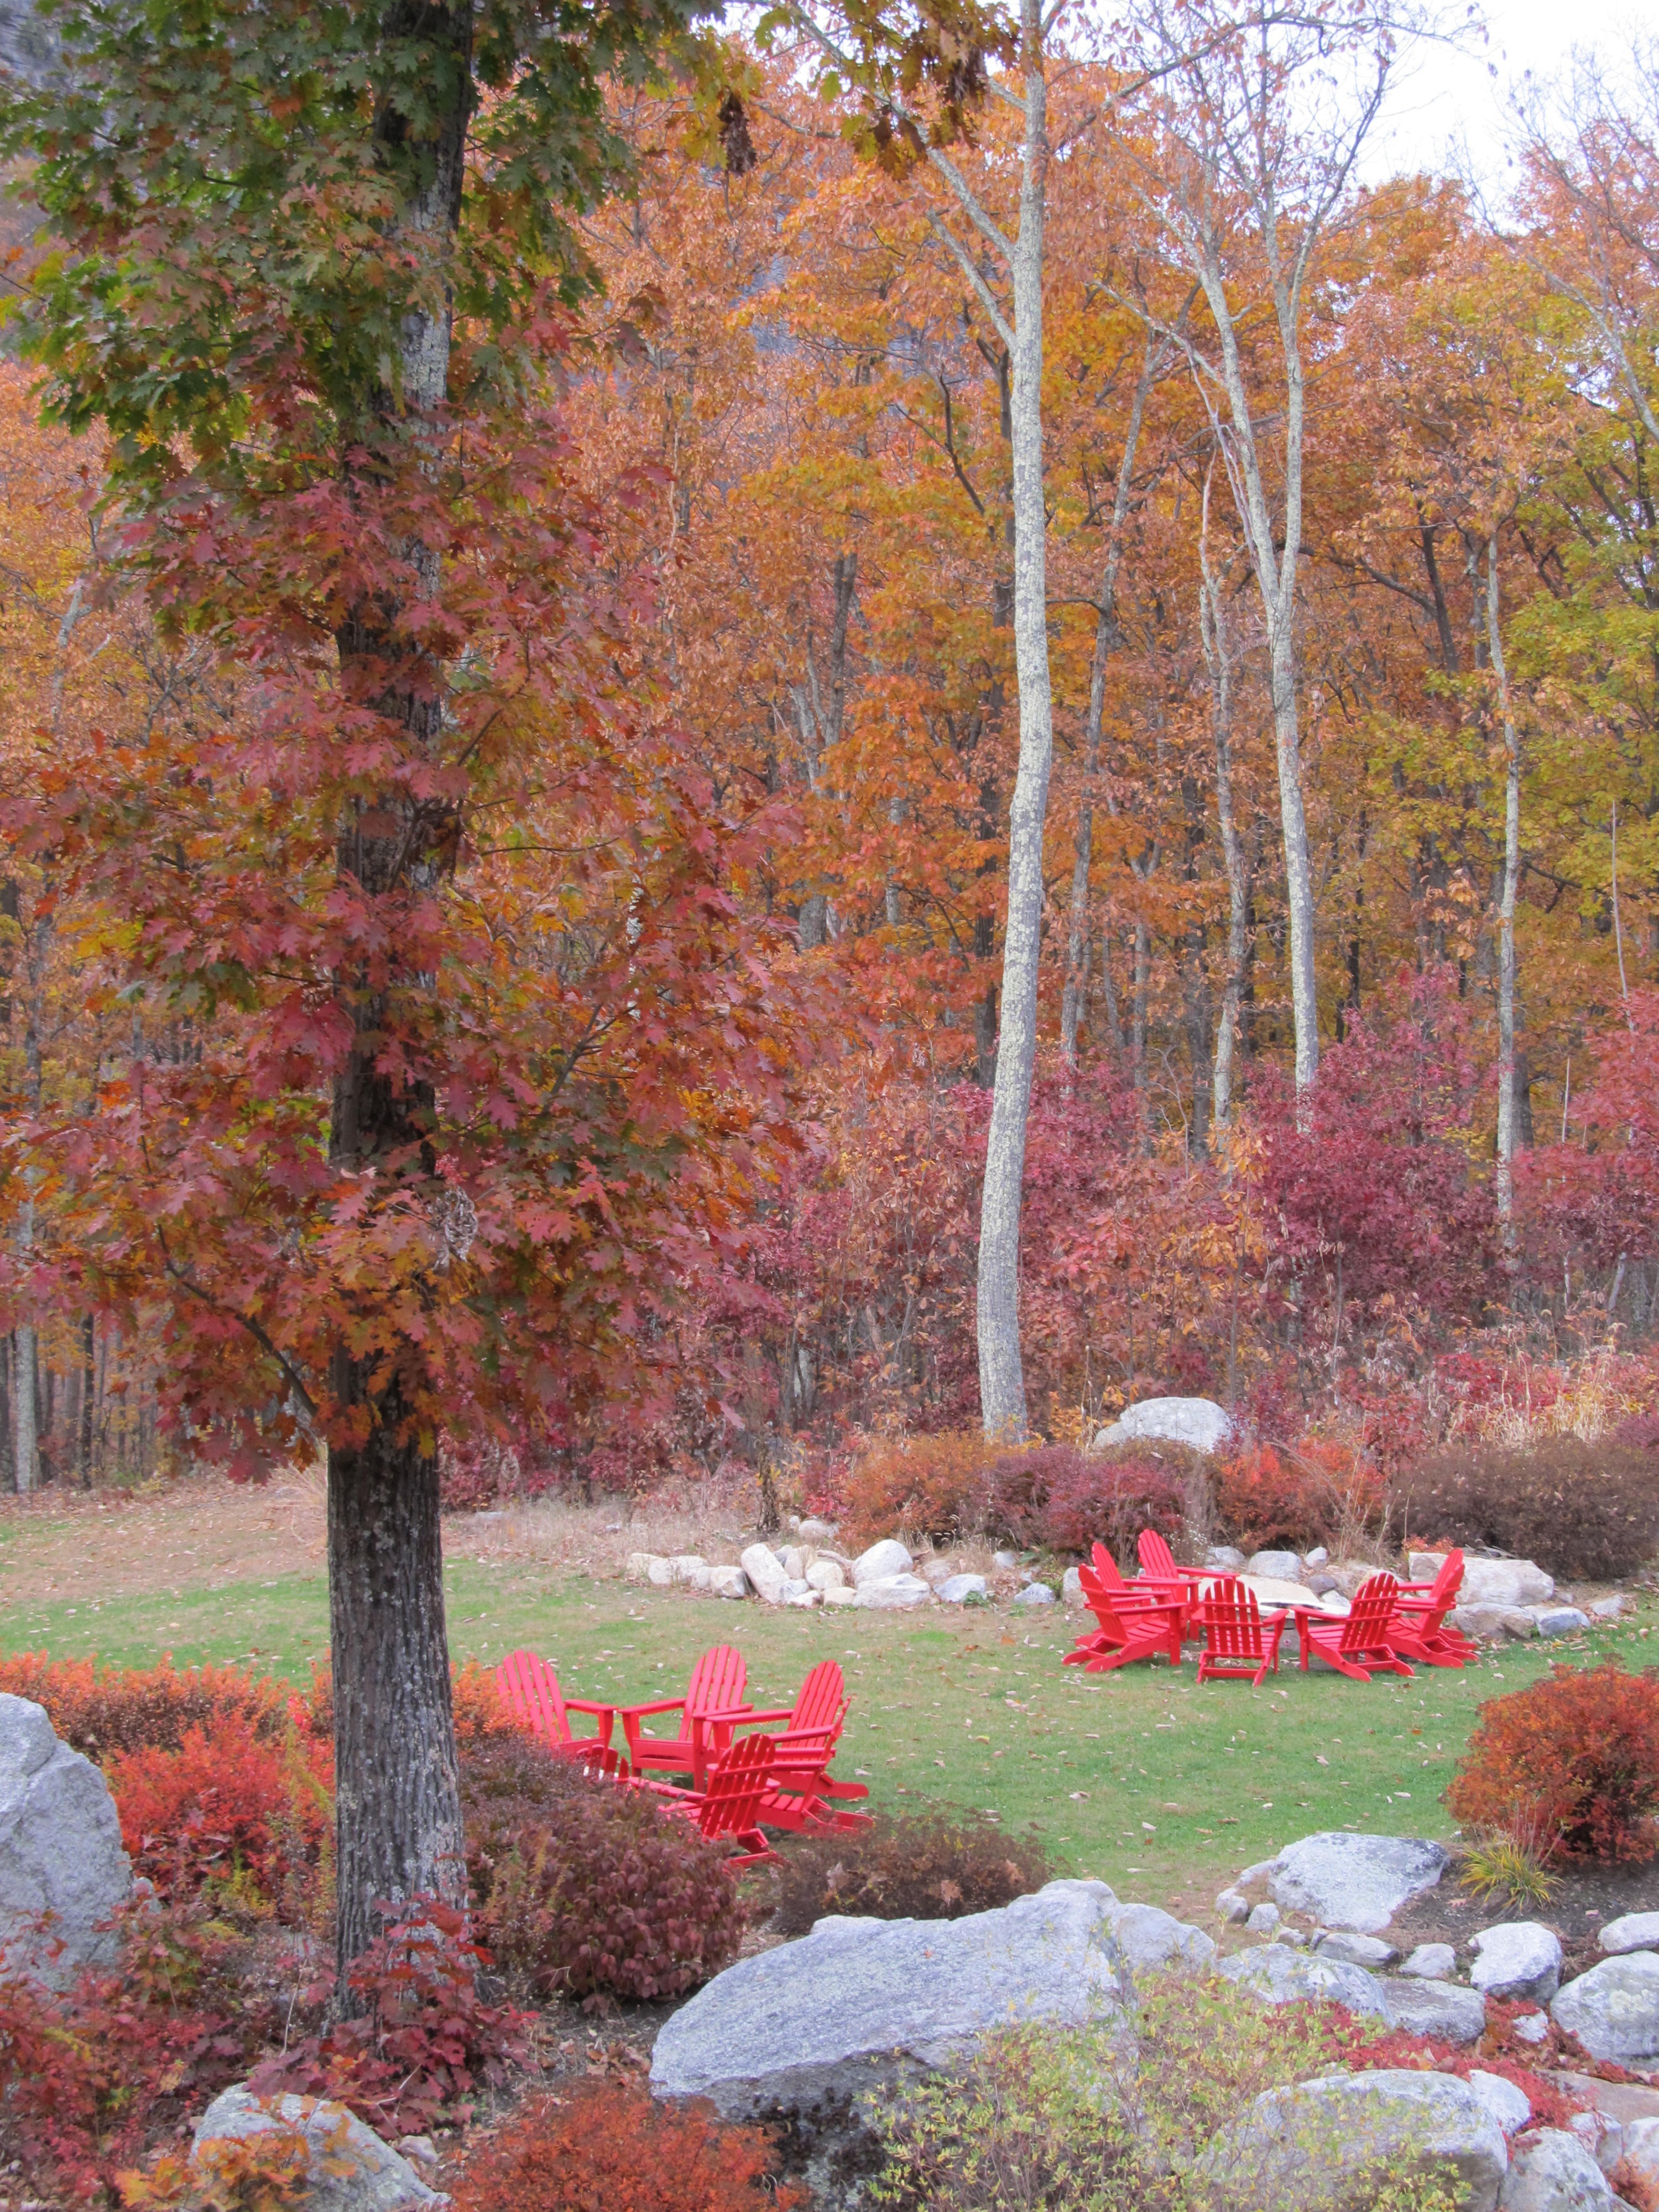 Minnewaska's grounds and fire pit